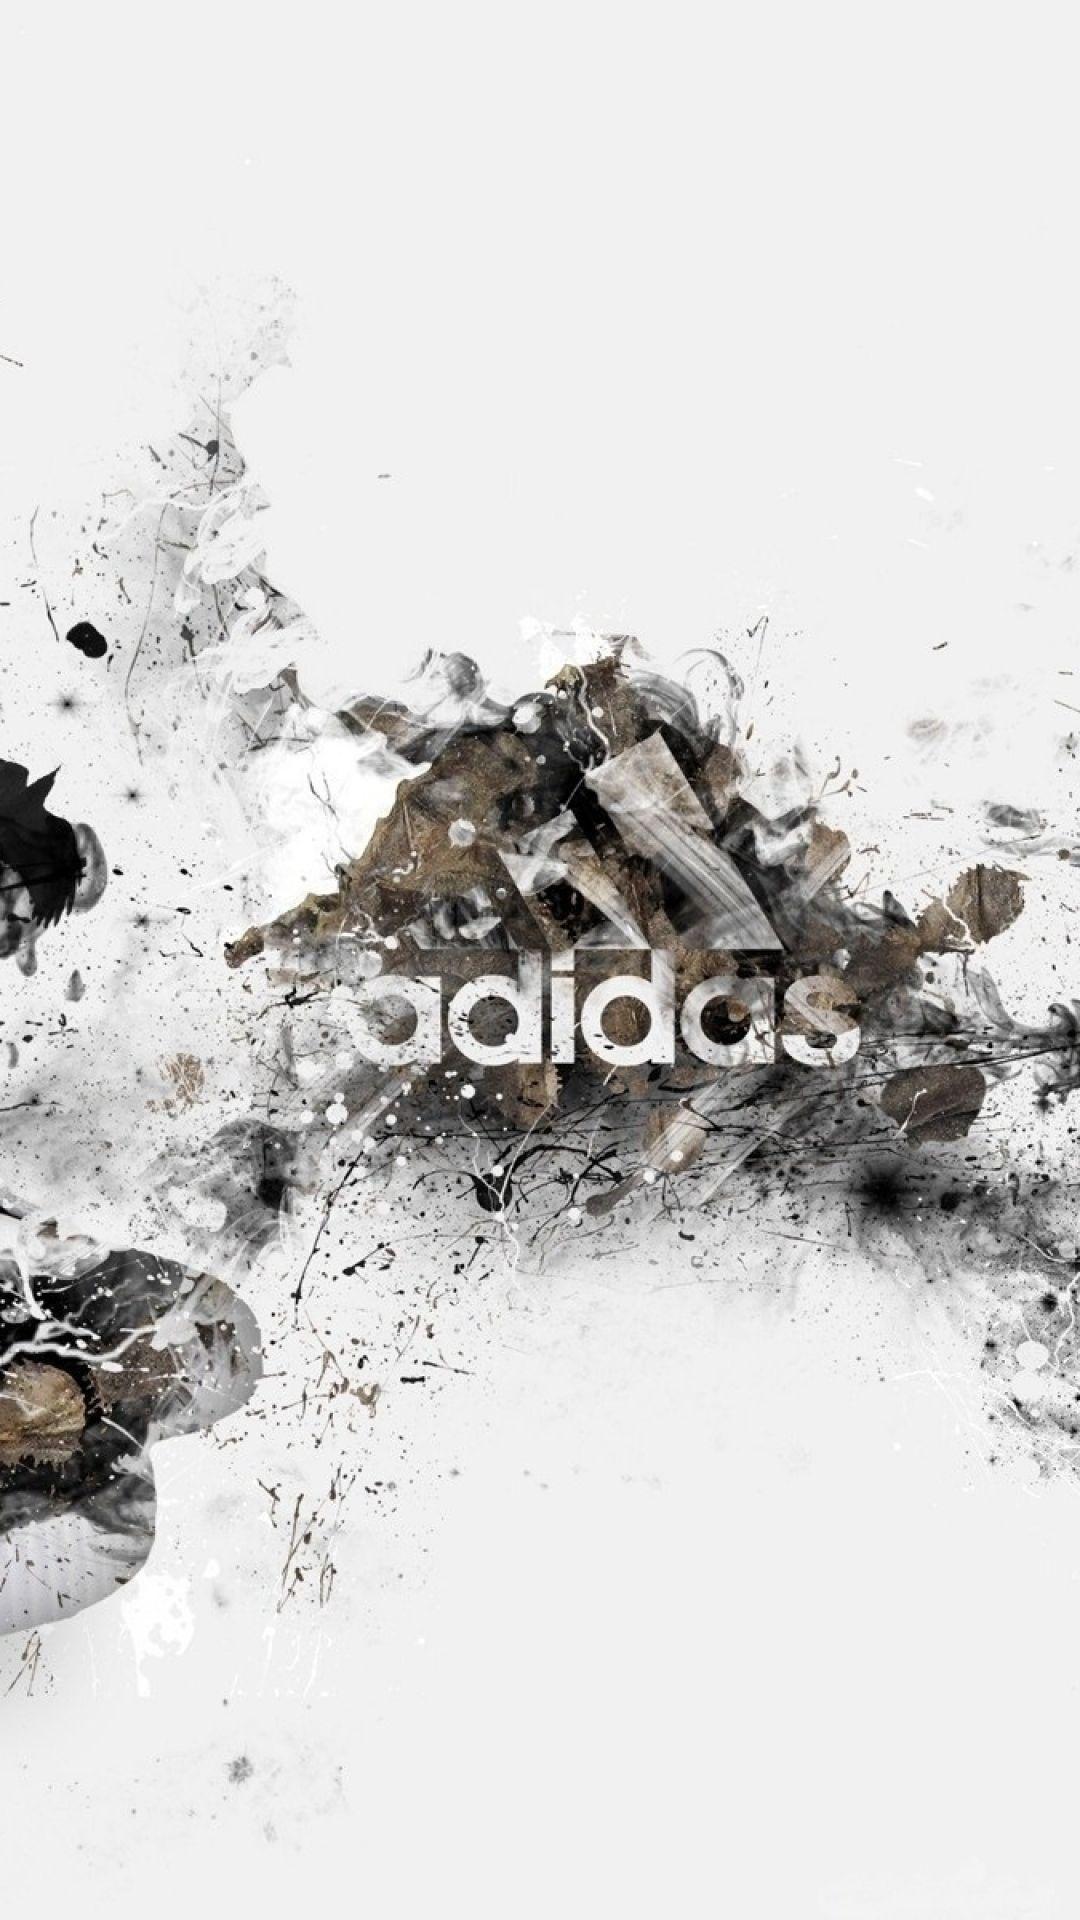 Download Wallpaper 1080x1920 Adidas, Sneakers, Stylish, Brand Sony